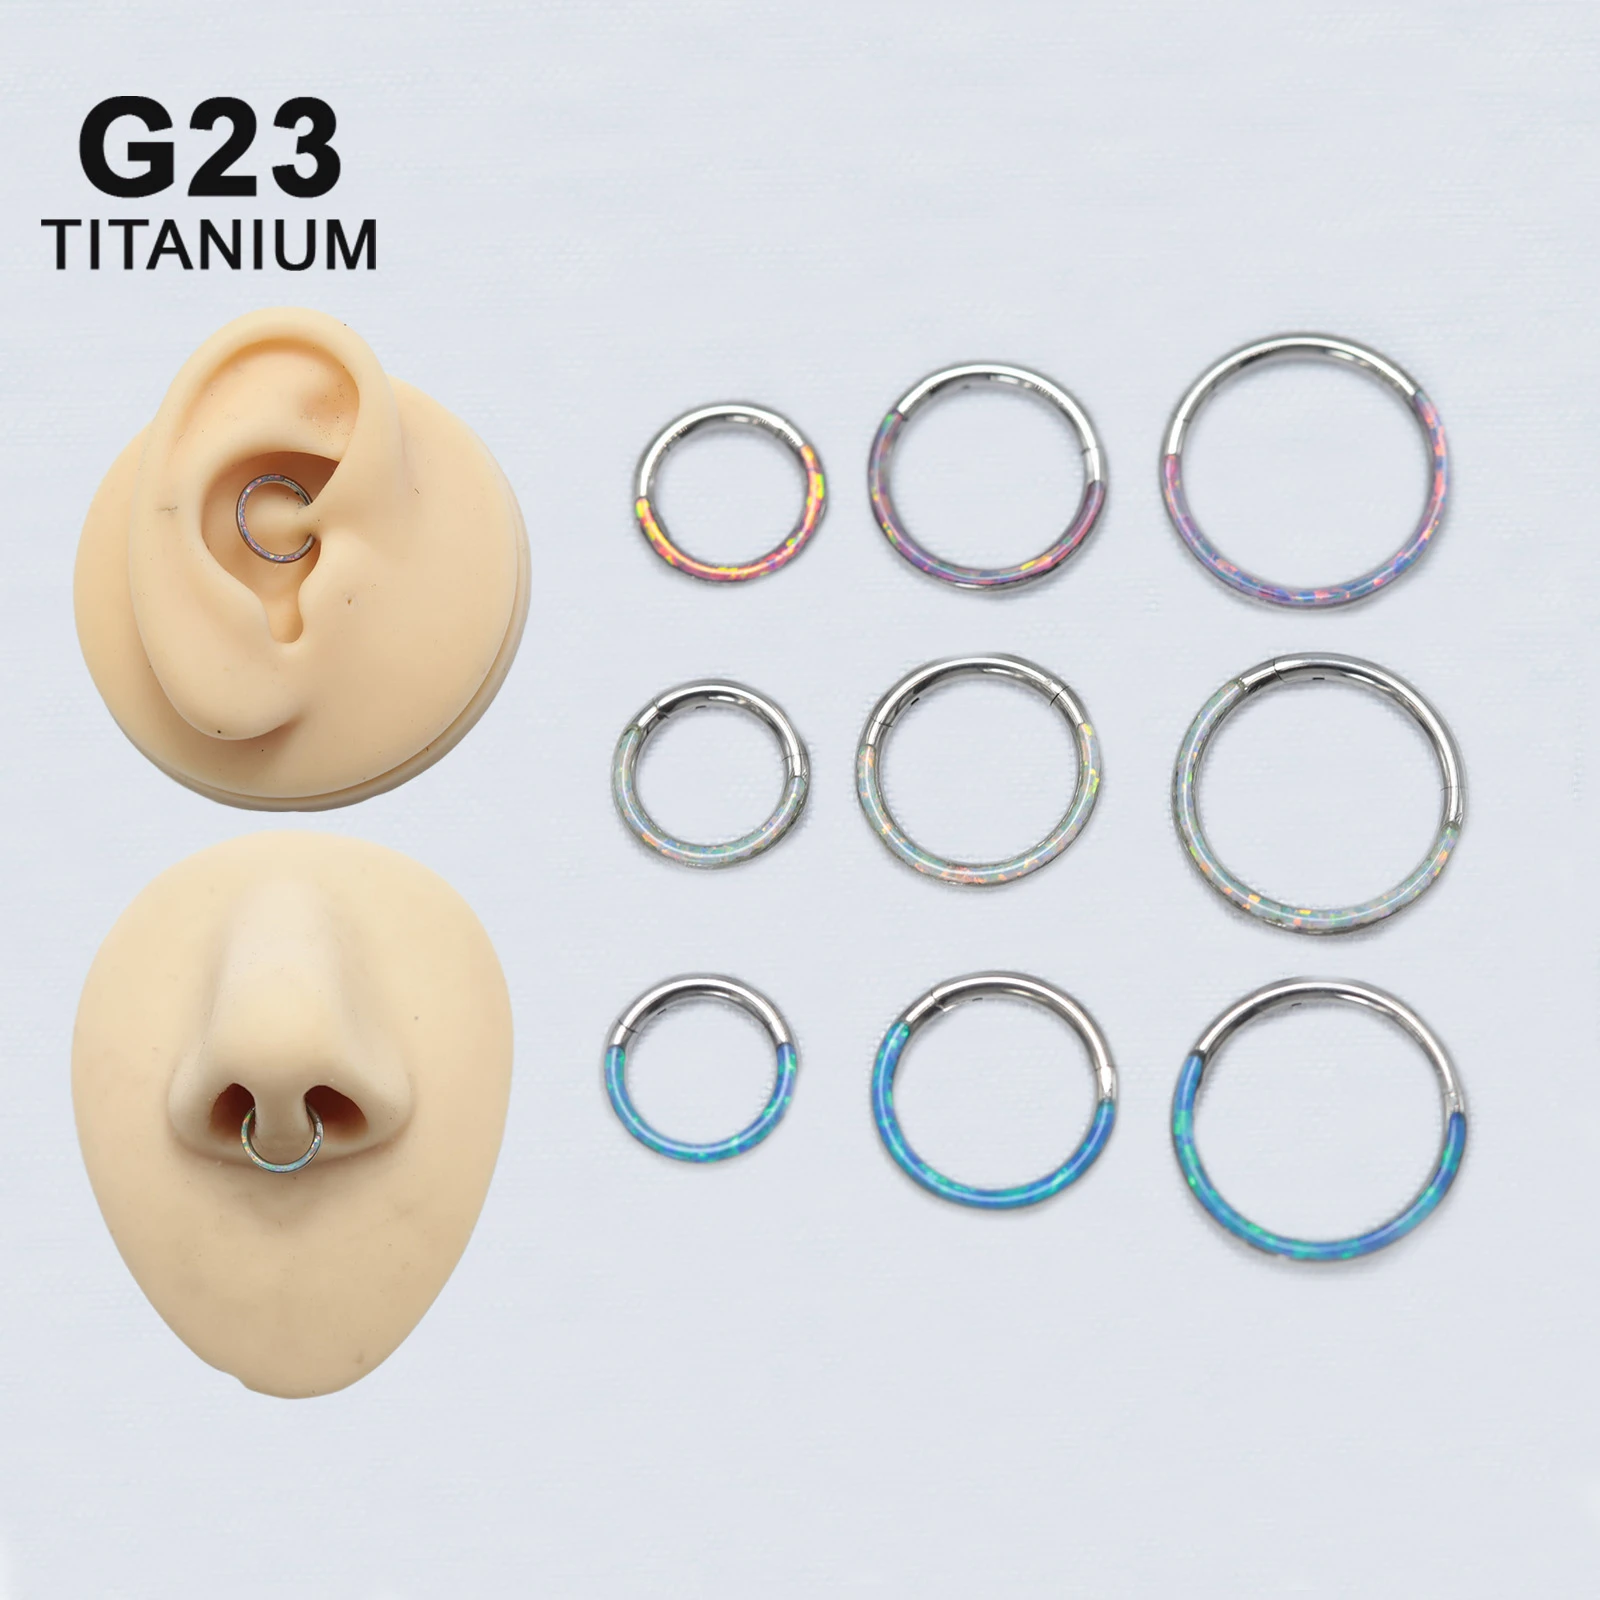 New 16G Implant Grade ASTM F136 Titanium Septum Piercing Ring Clicker Nose Body Jewelry with Opal